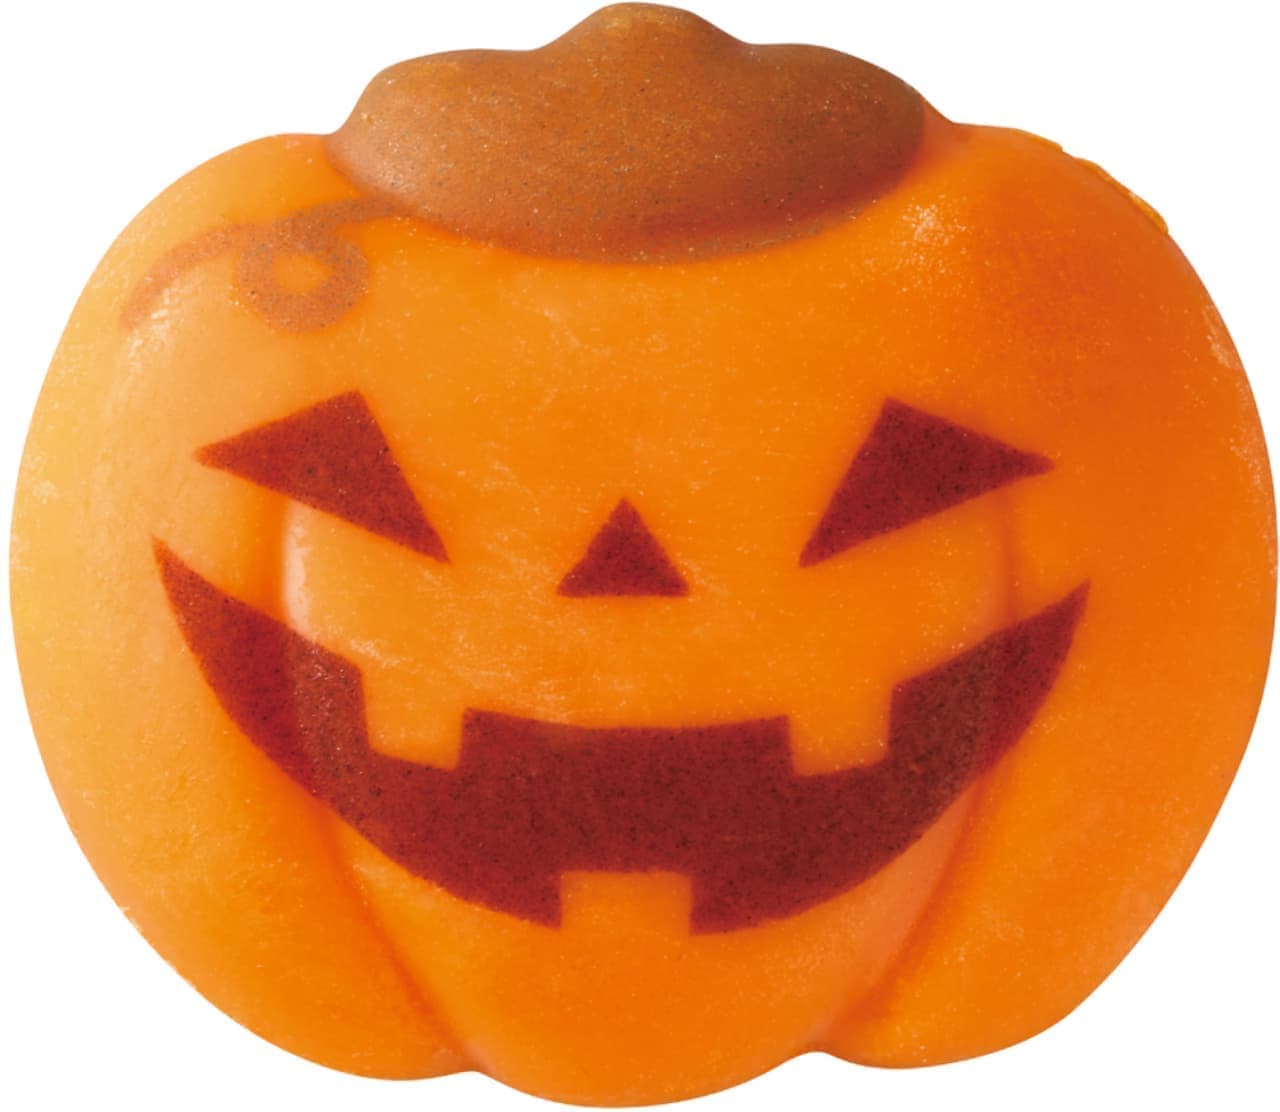 Cold Stone "Trick or Sweets" "Witches Pumpkin Cookies"